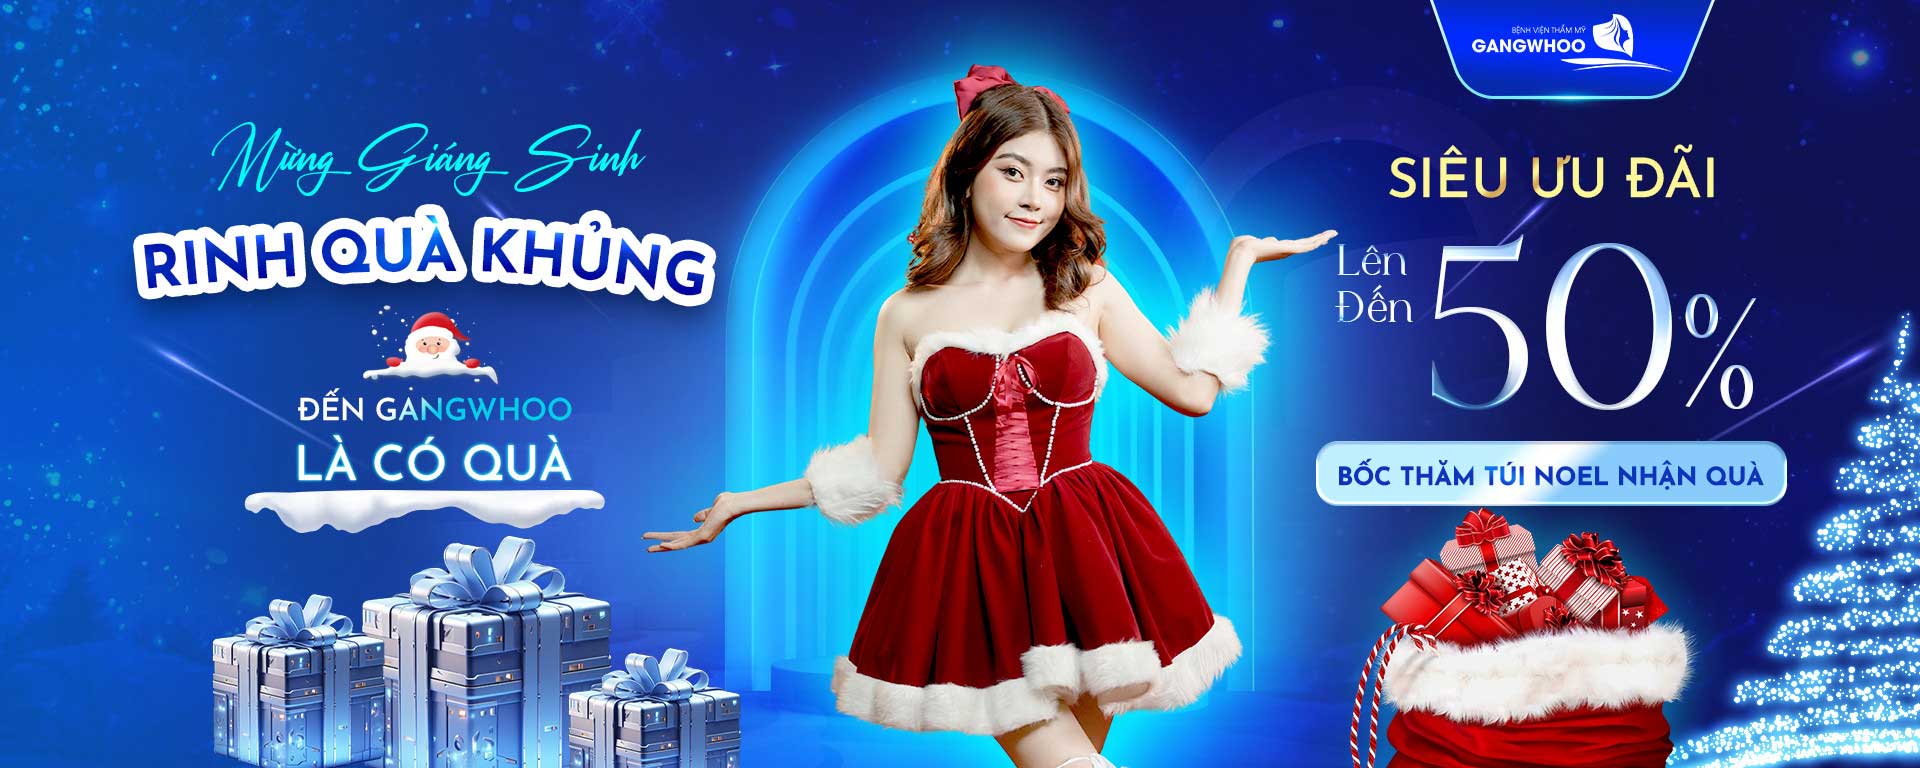 banner giang sinh pc